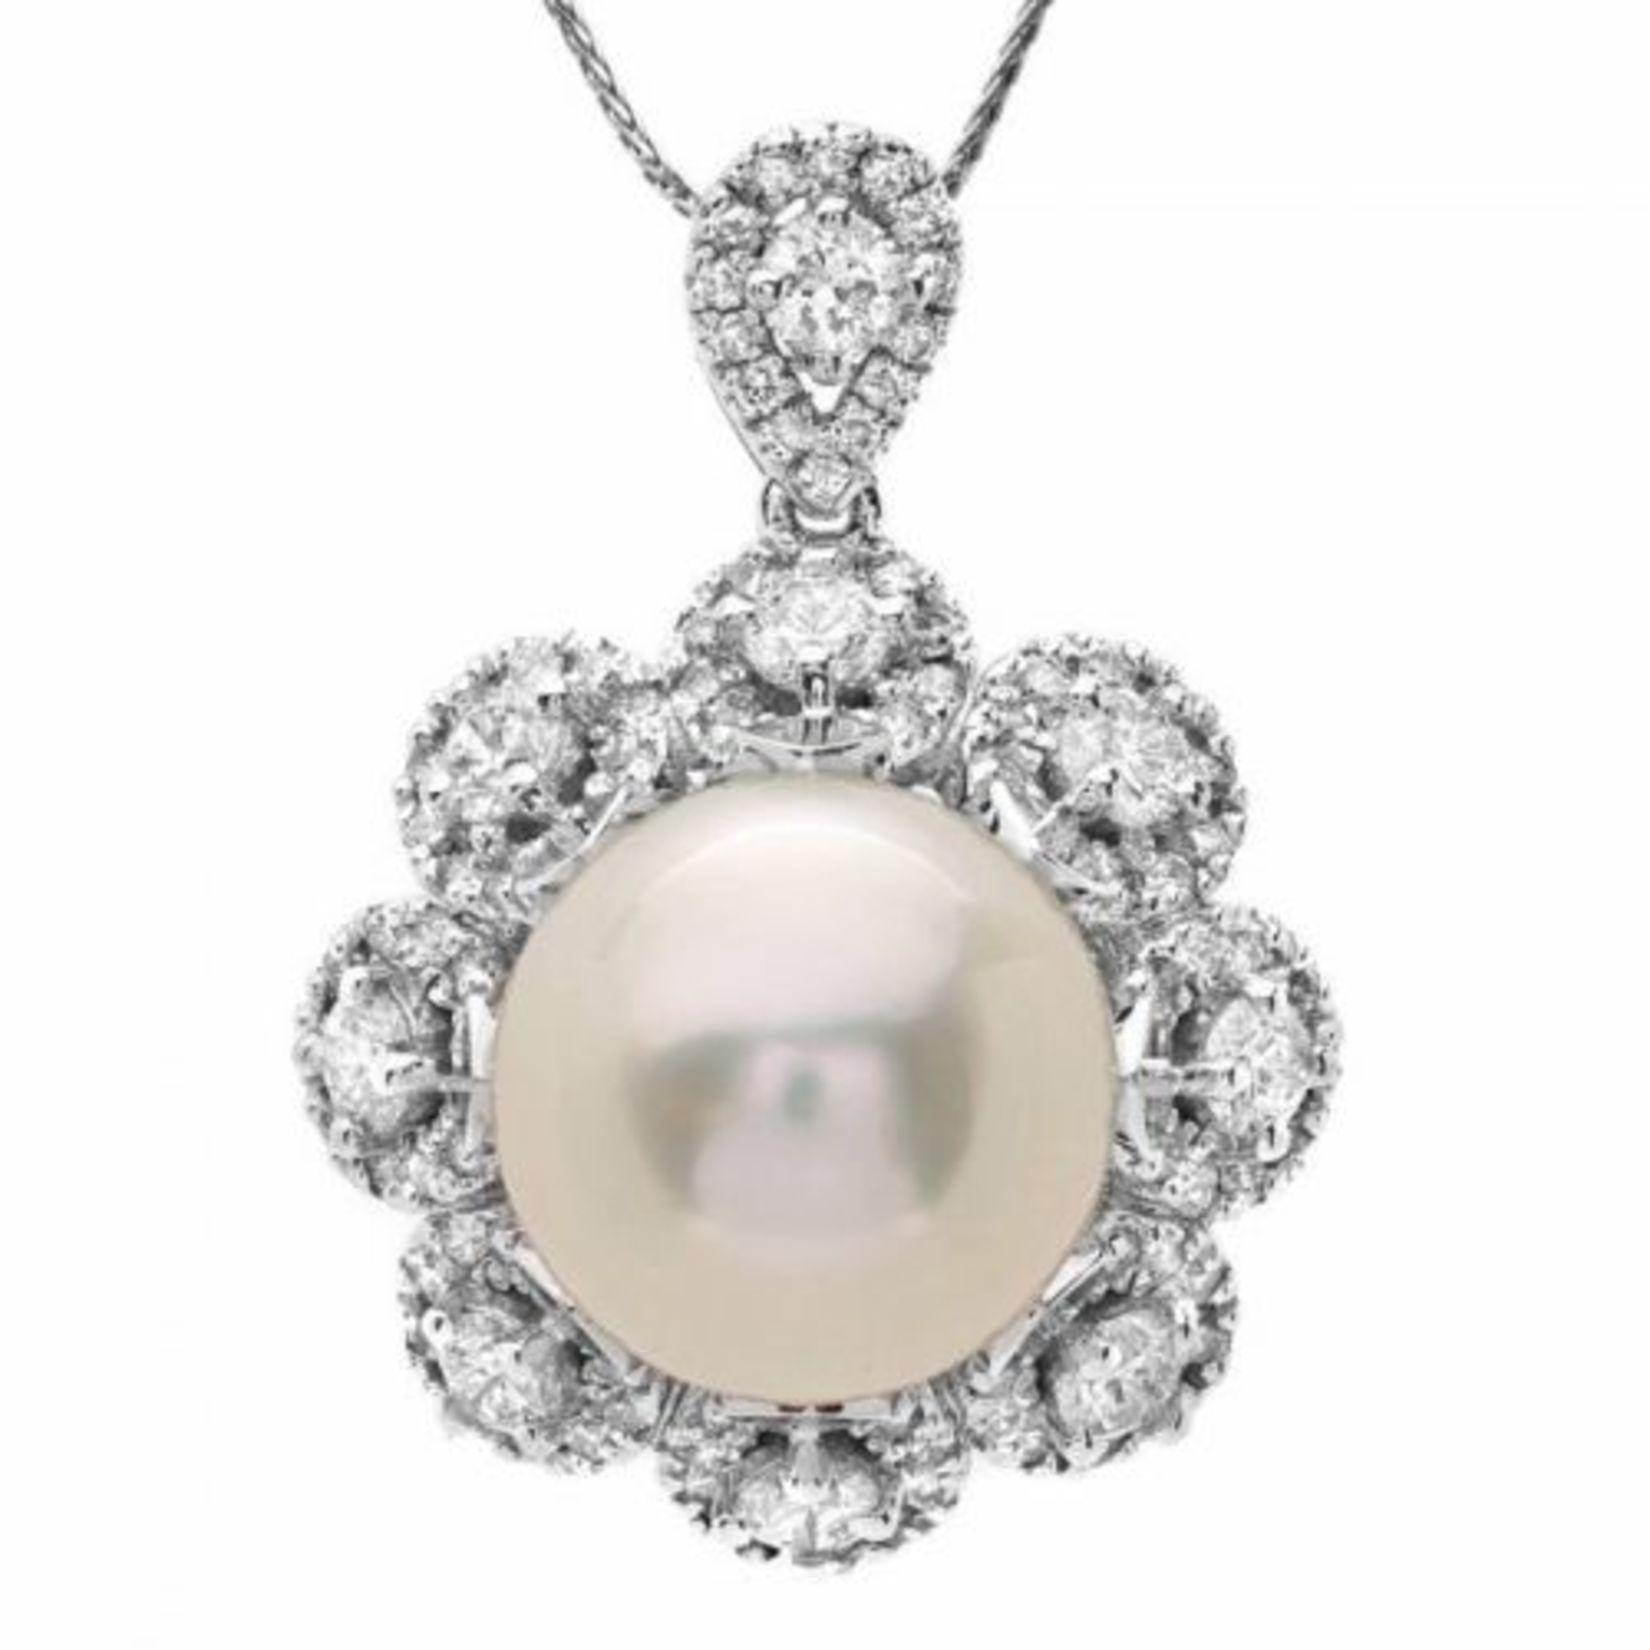 14K Gold 14mm South Sea Pearl and 3.16ct Diamond Pendant